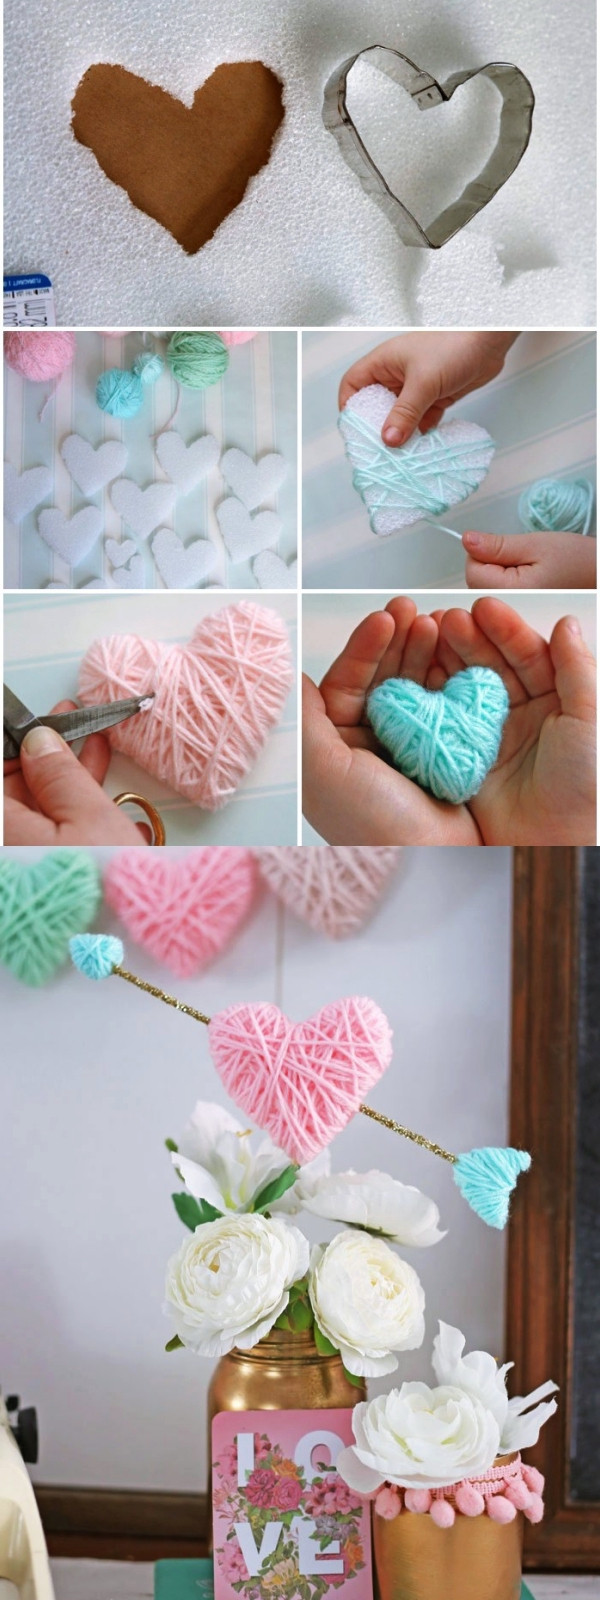 Cute Valentines Day Ideas For Him
 30 Cute and Romantic Valentines Day Ideas for Him